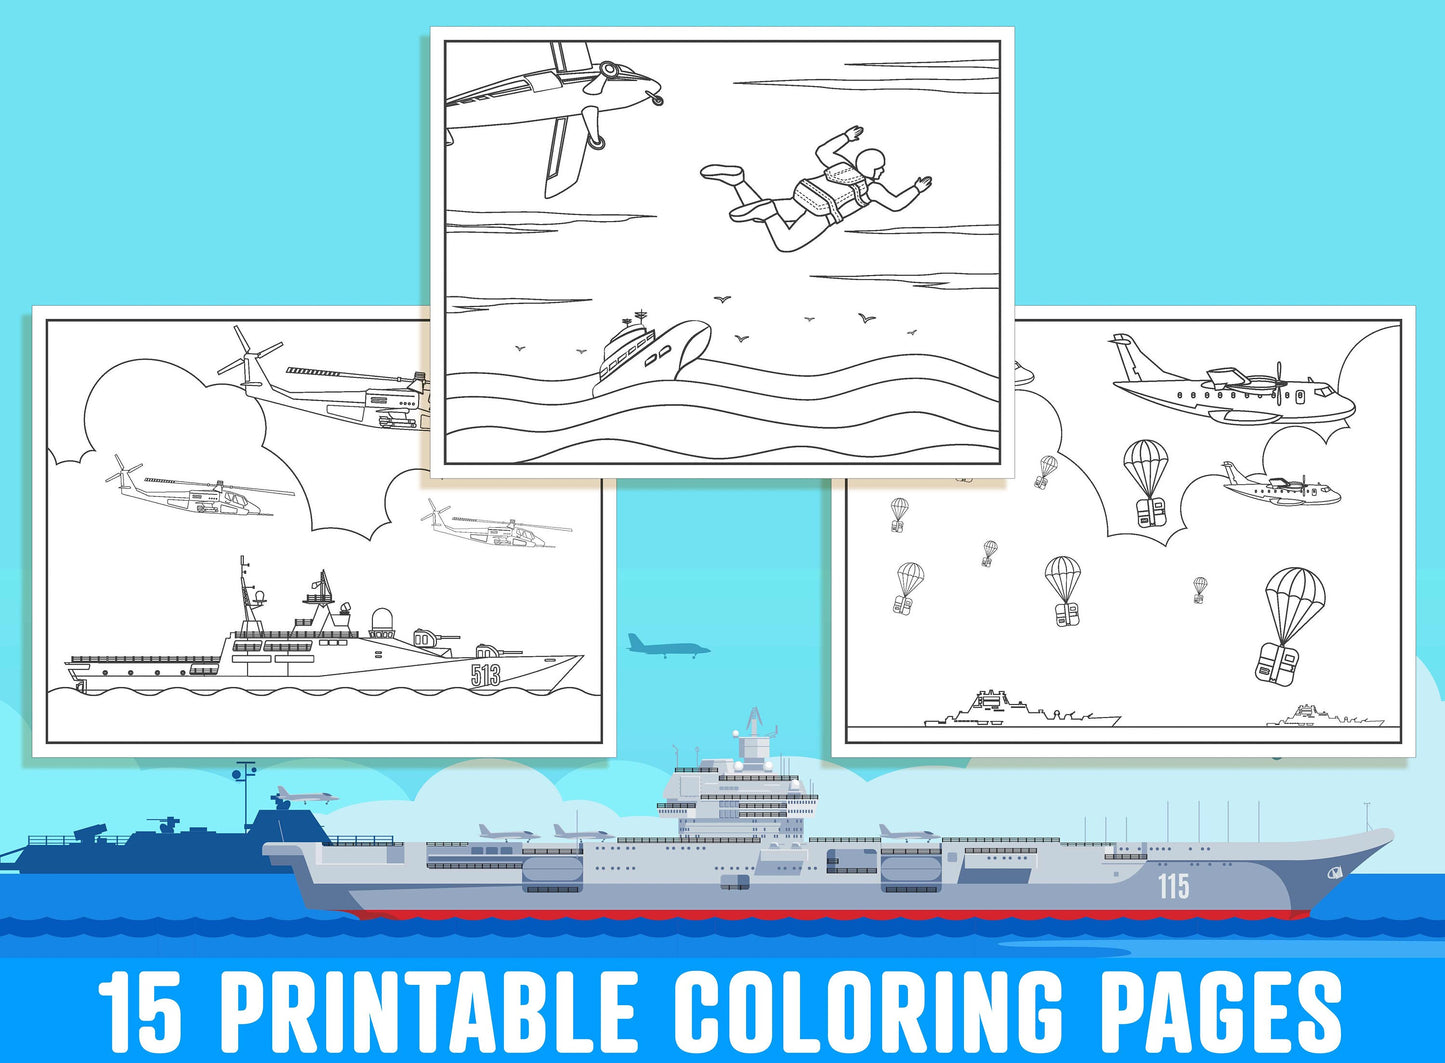 Navy Coloring Pages - 15 Printable US Navy Coloring Pages for Kids, Boys, Girls, Teens, Adults. Navy Party Activity, PDF, Instant Download.